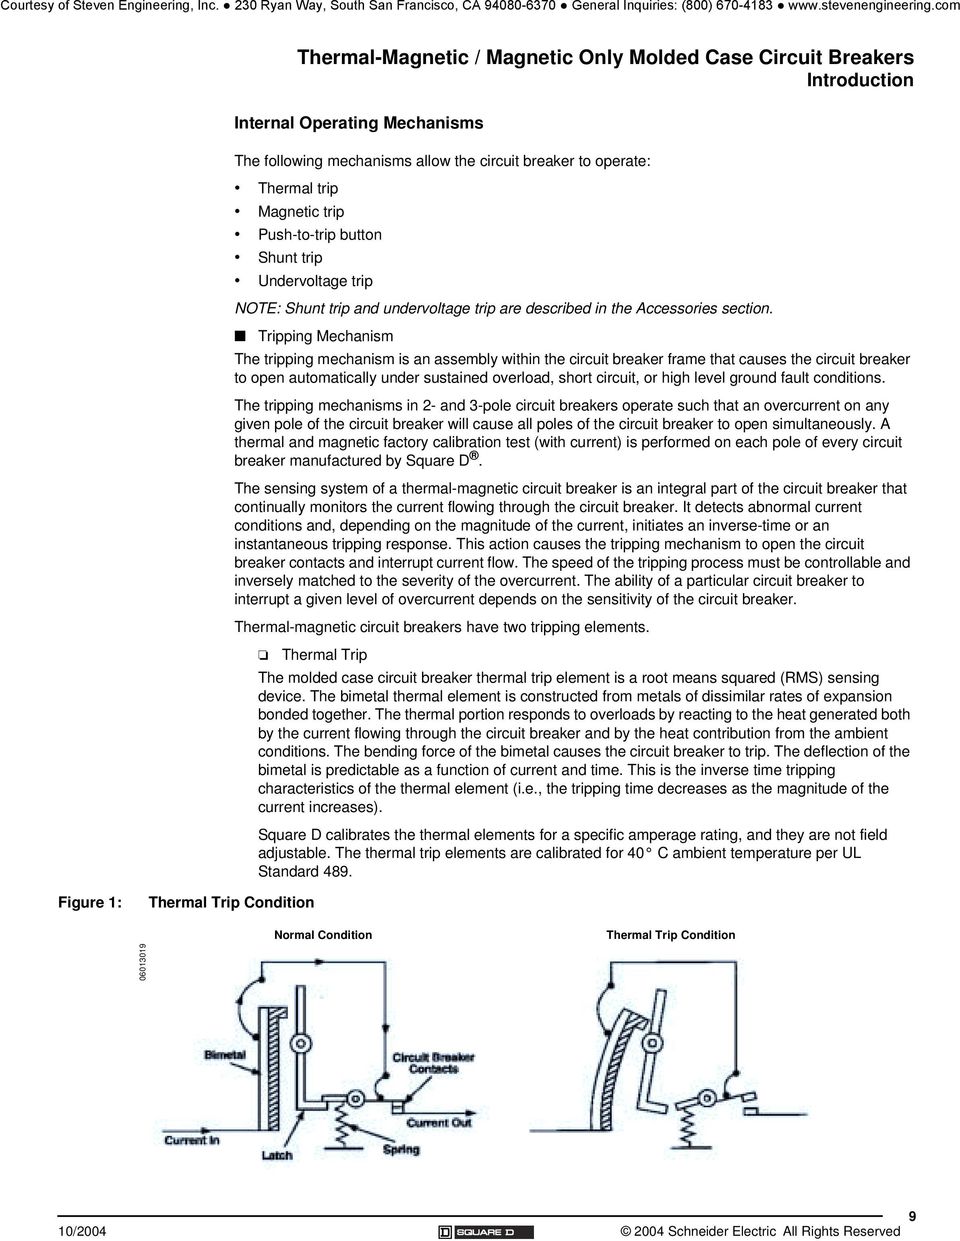 Tripping Mechanism The tripping mechanism is an assembly within the circuit breaker frame that causes the circuit breaker to open automatically under sustained overload, short circuit, or high level